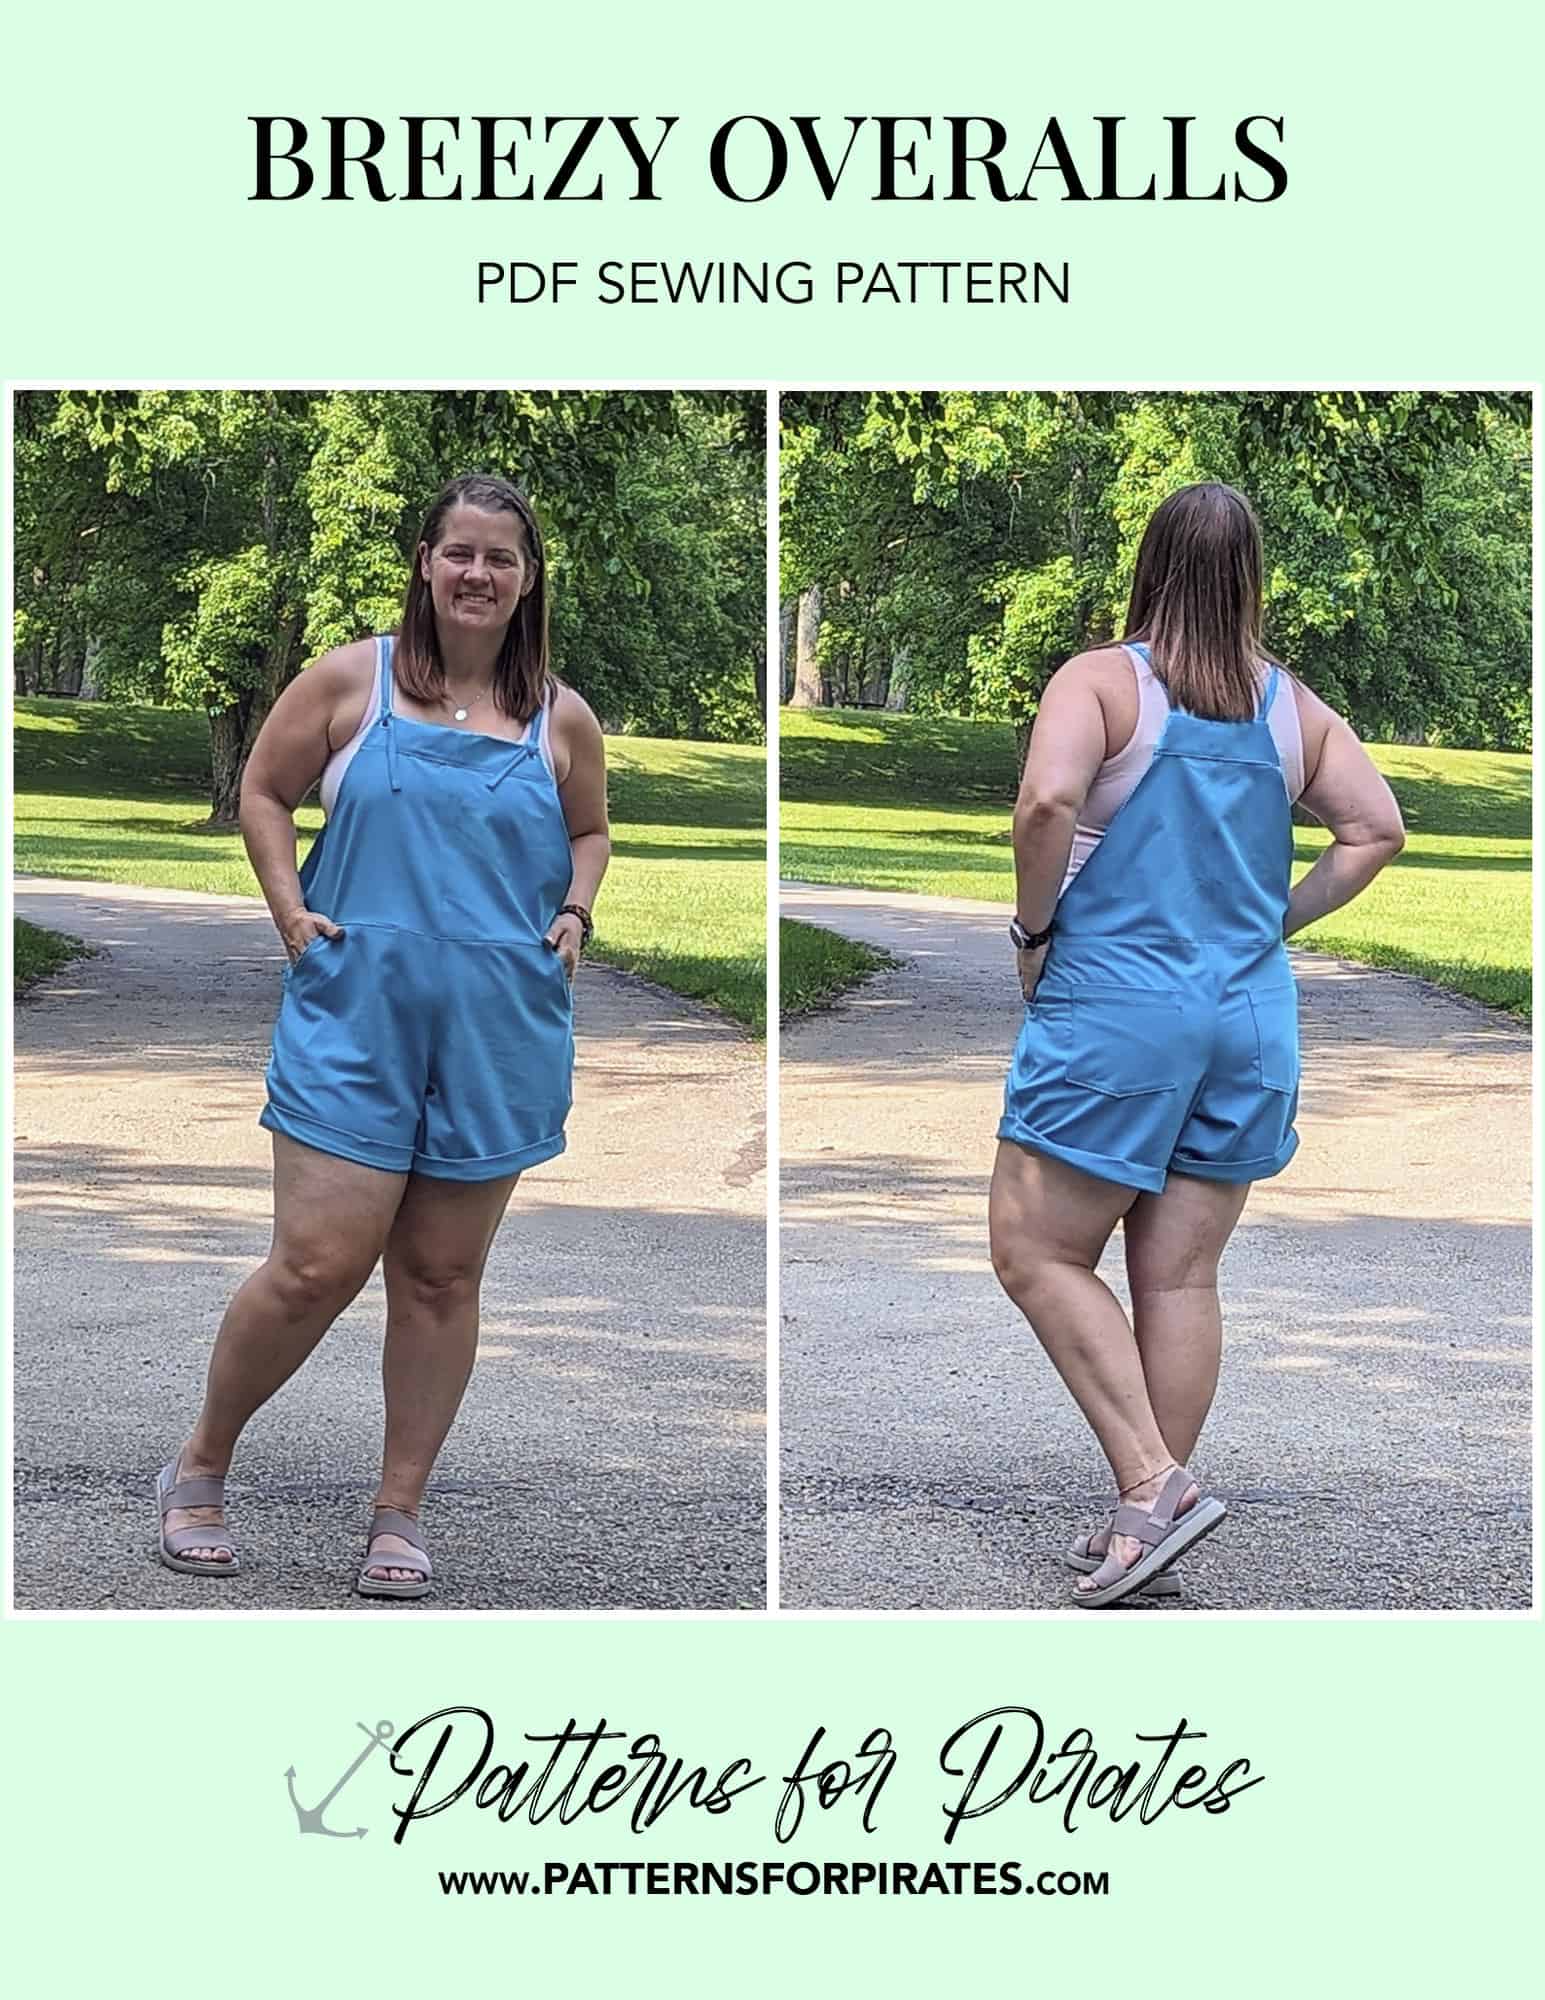 Patterns Pirates - for Breezy Overalls